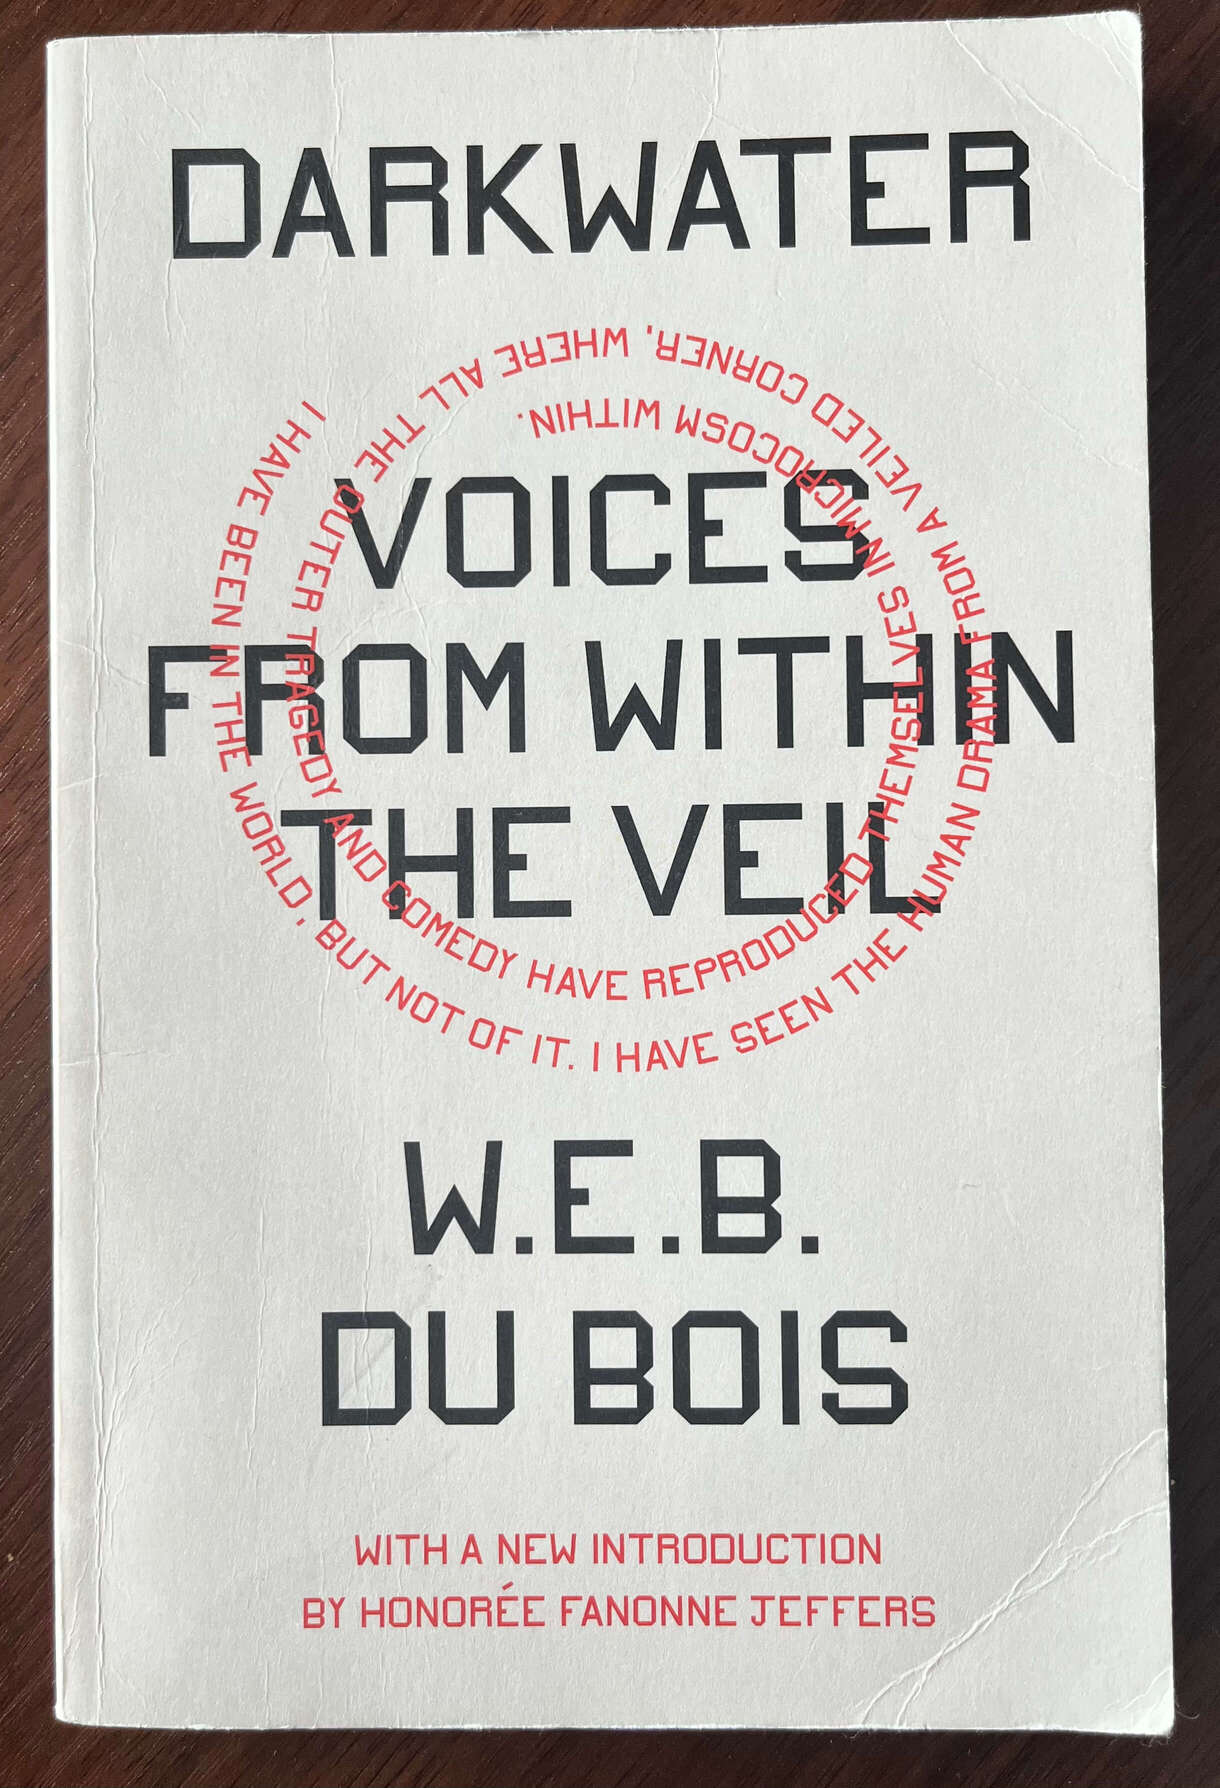 “Darkwater: Voices from Within the Veil” by W.E.B. DuBois. With a new introduction by Honorêe Fanonne Jeffers.